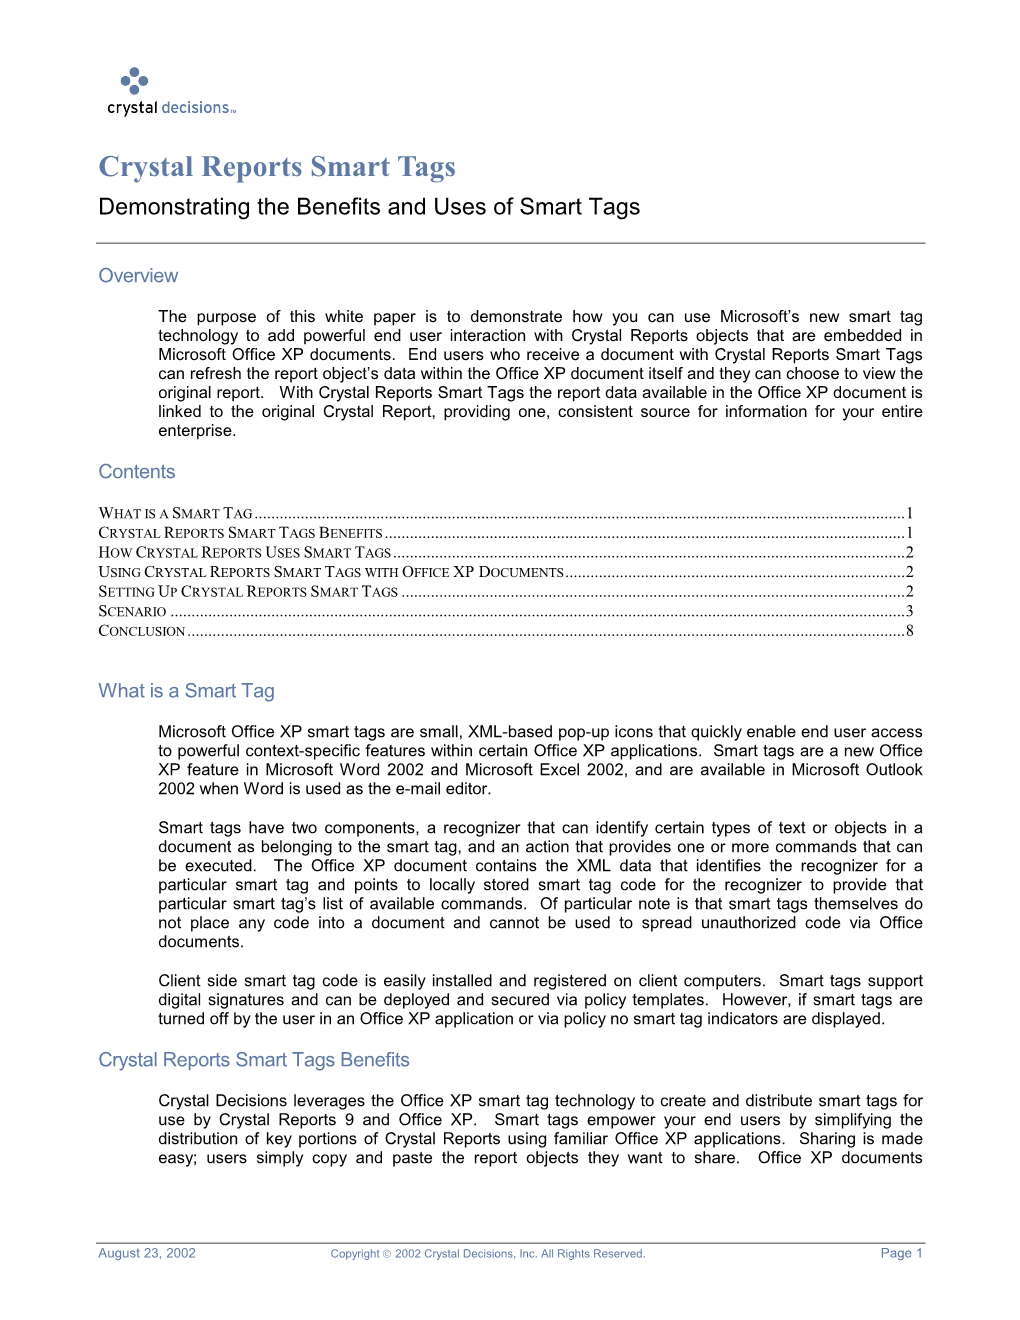 Crystal Reports Smart Tags Demonstrating the Benefits and Uses of Smart Tags